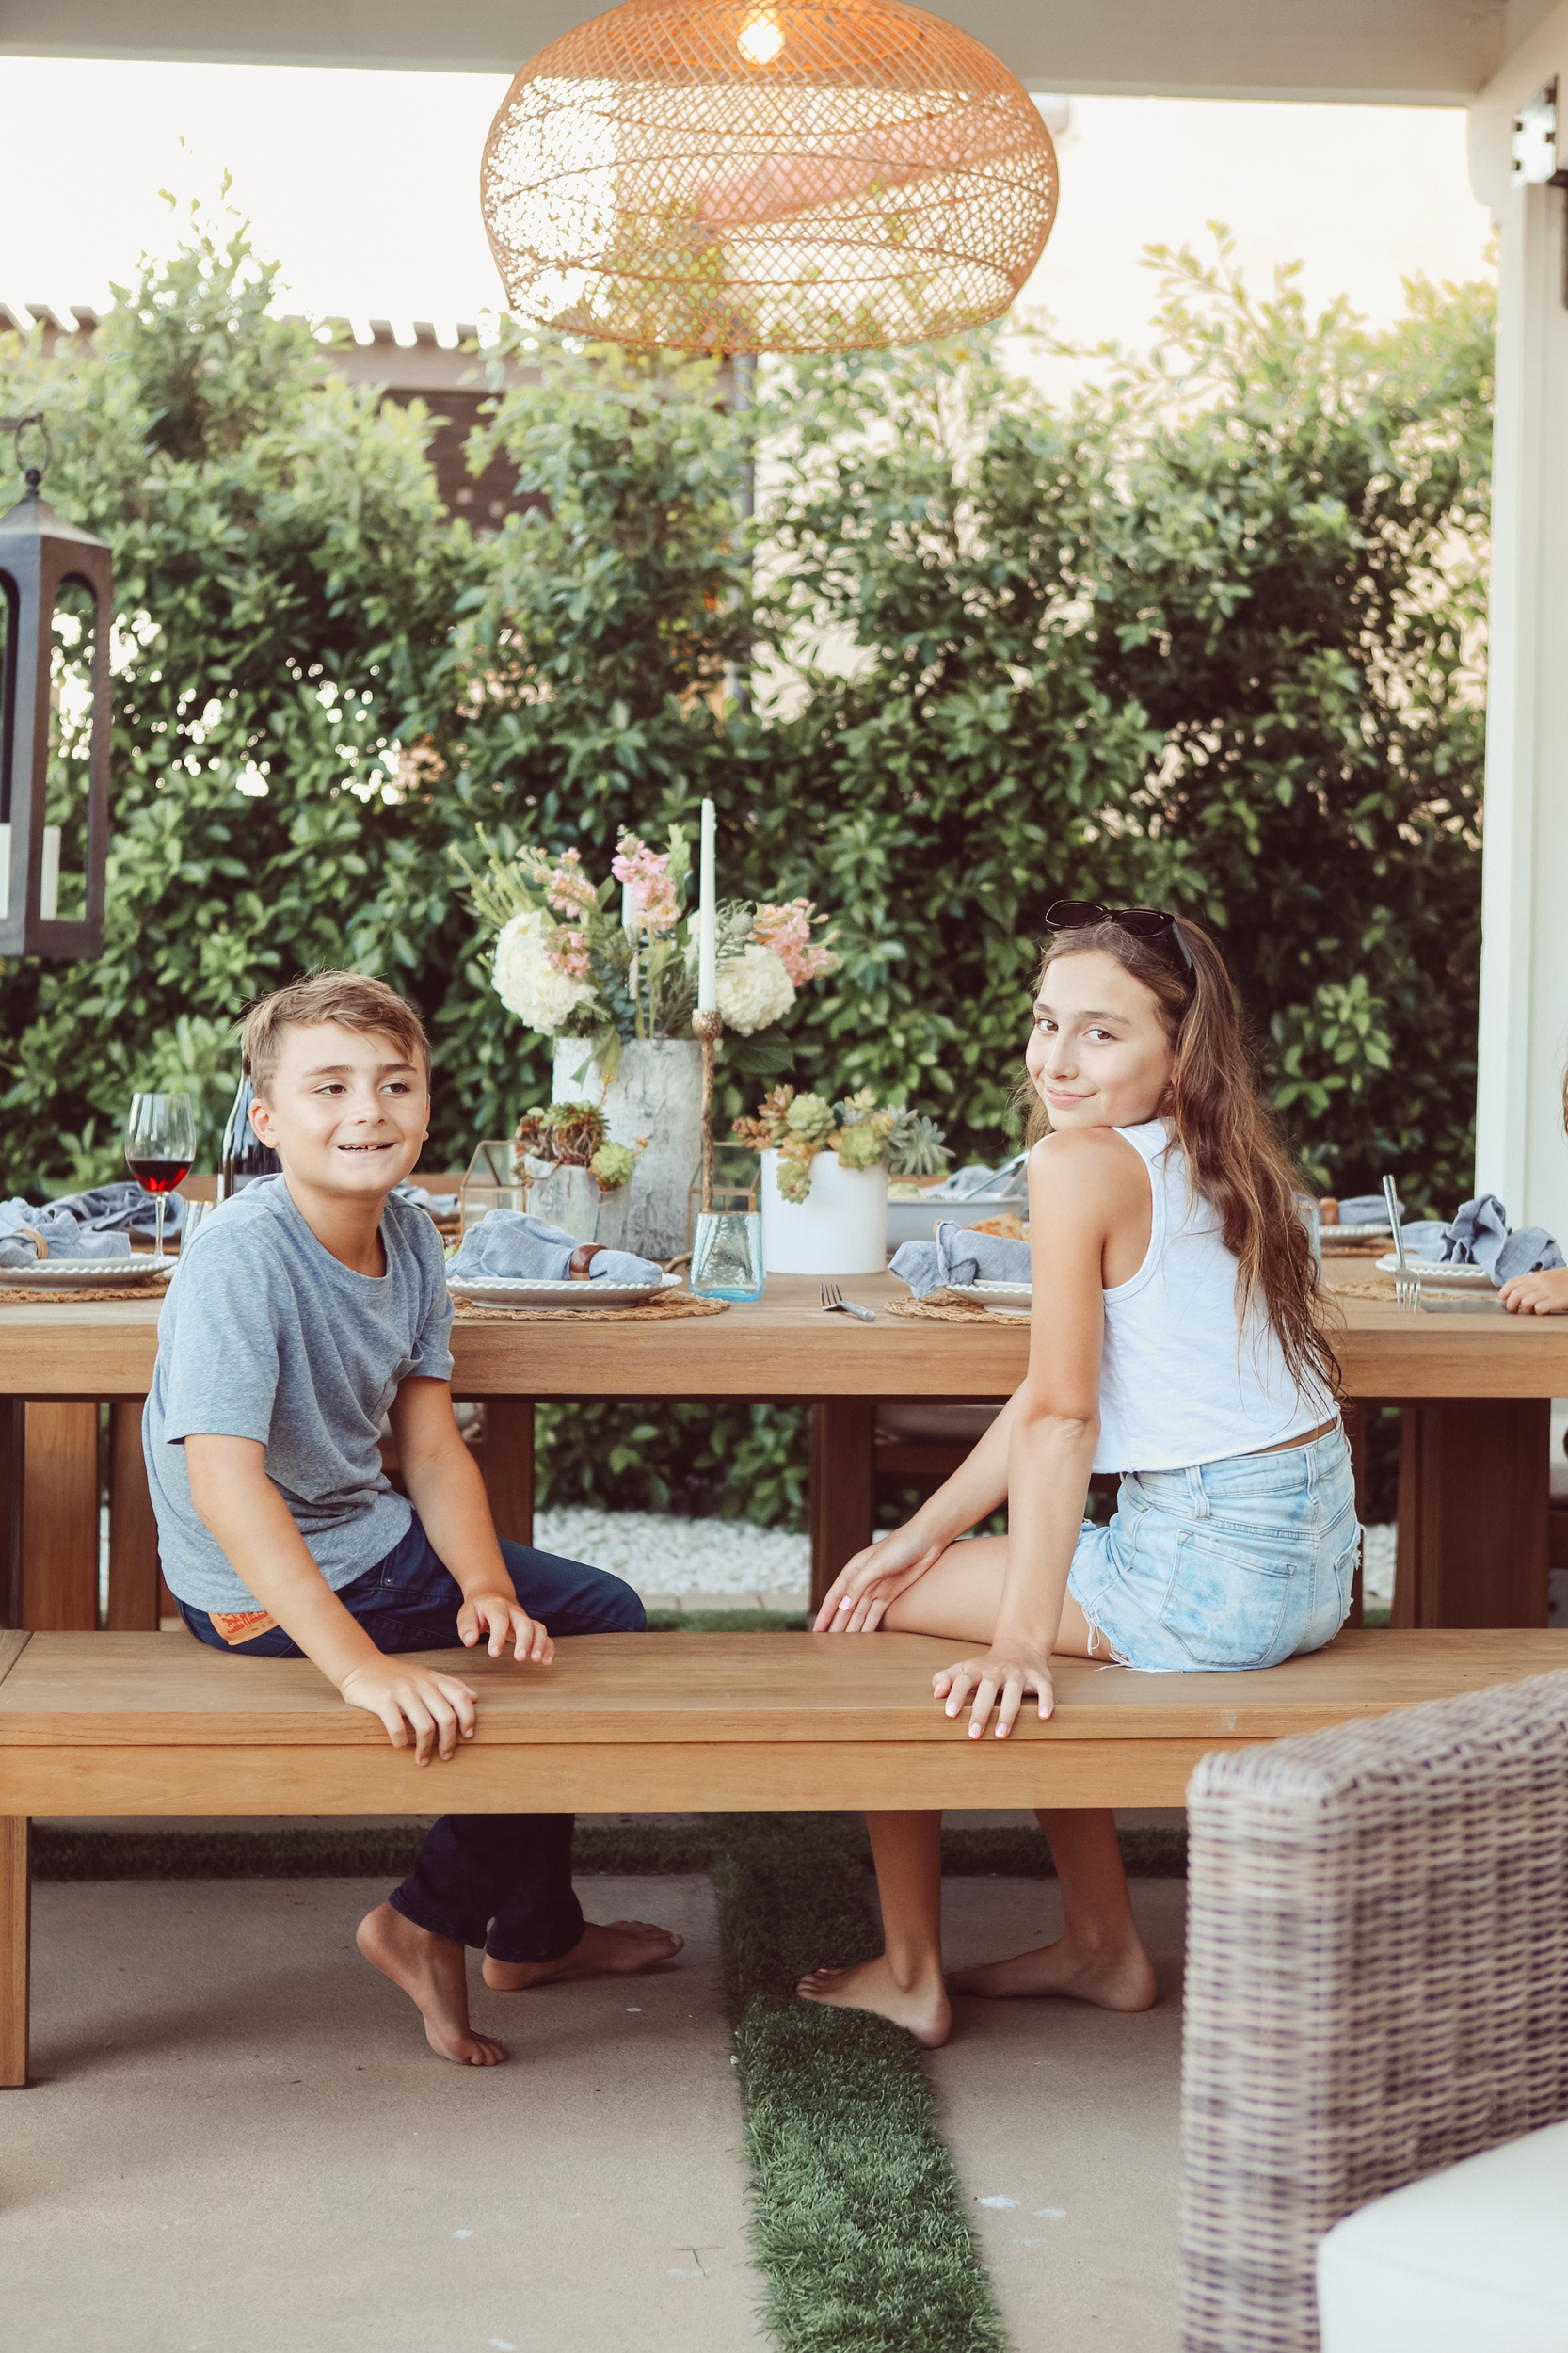 A brother and sister sit on a table in their backyard eating lunch.